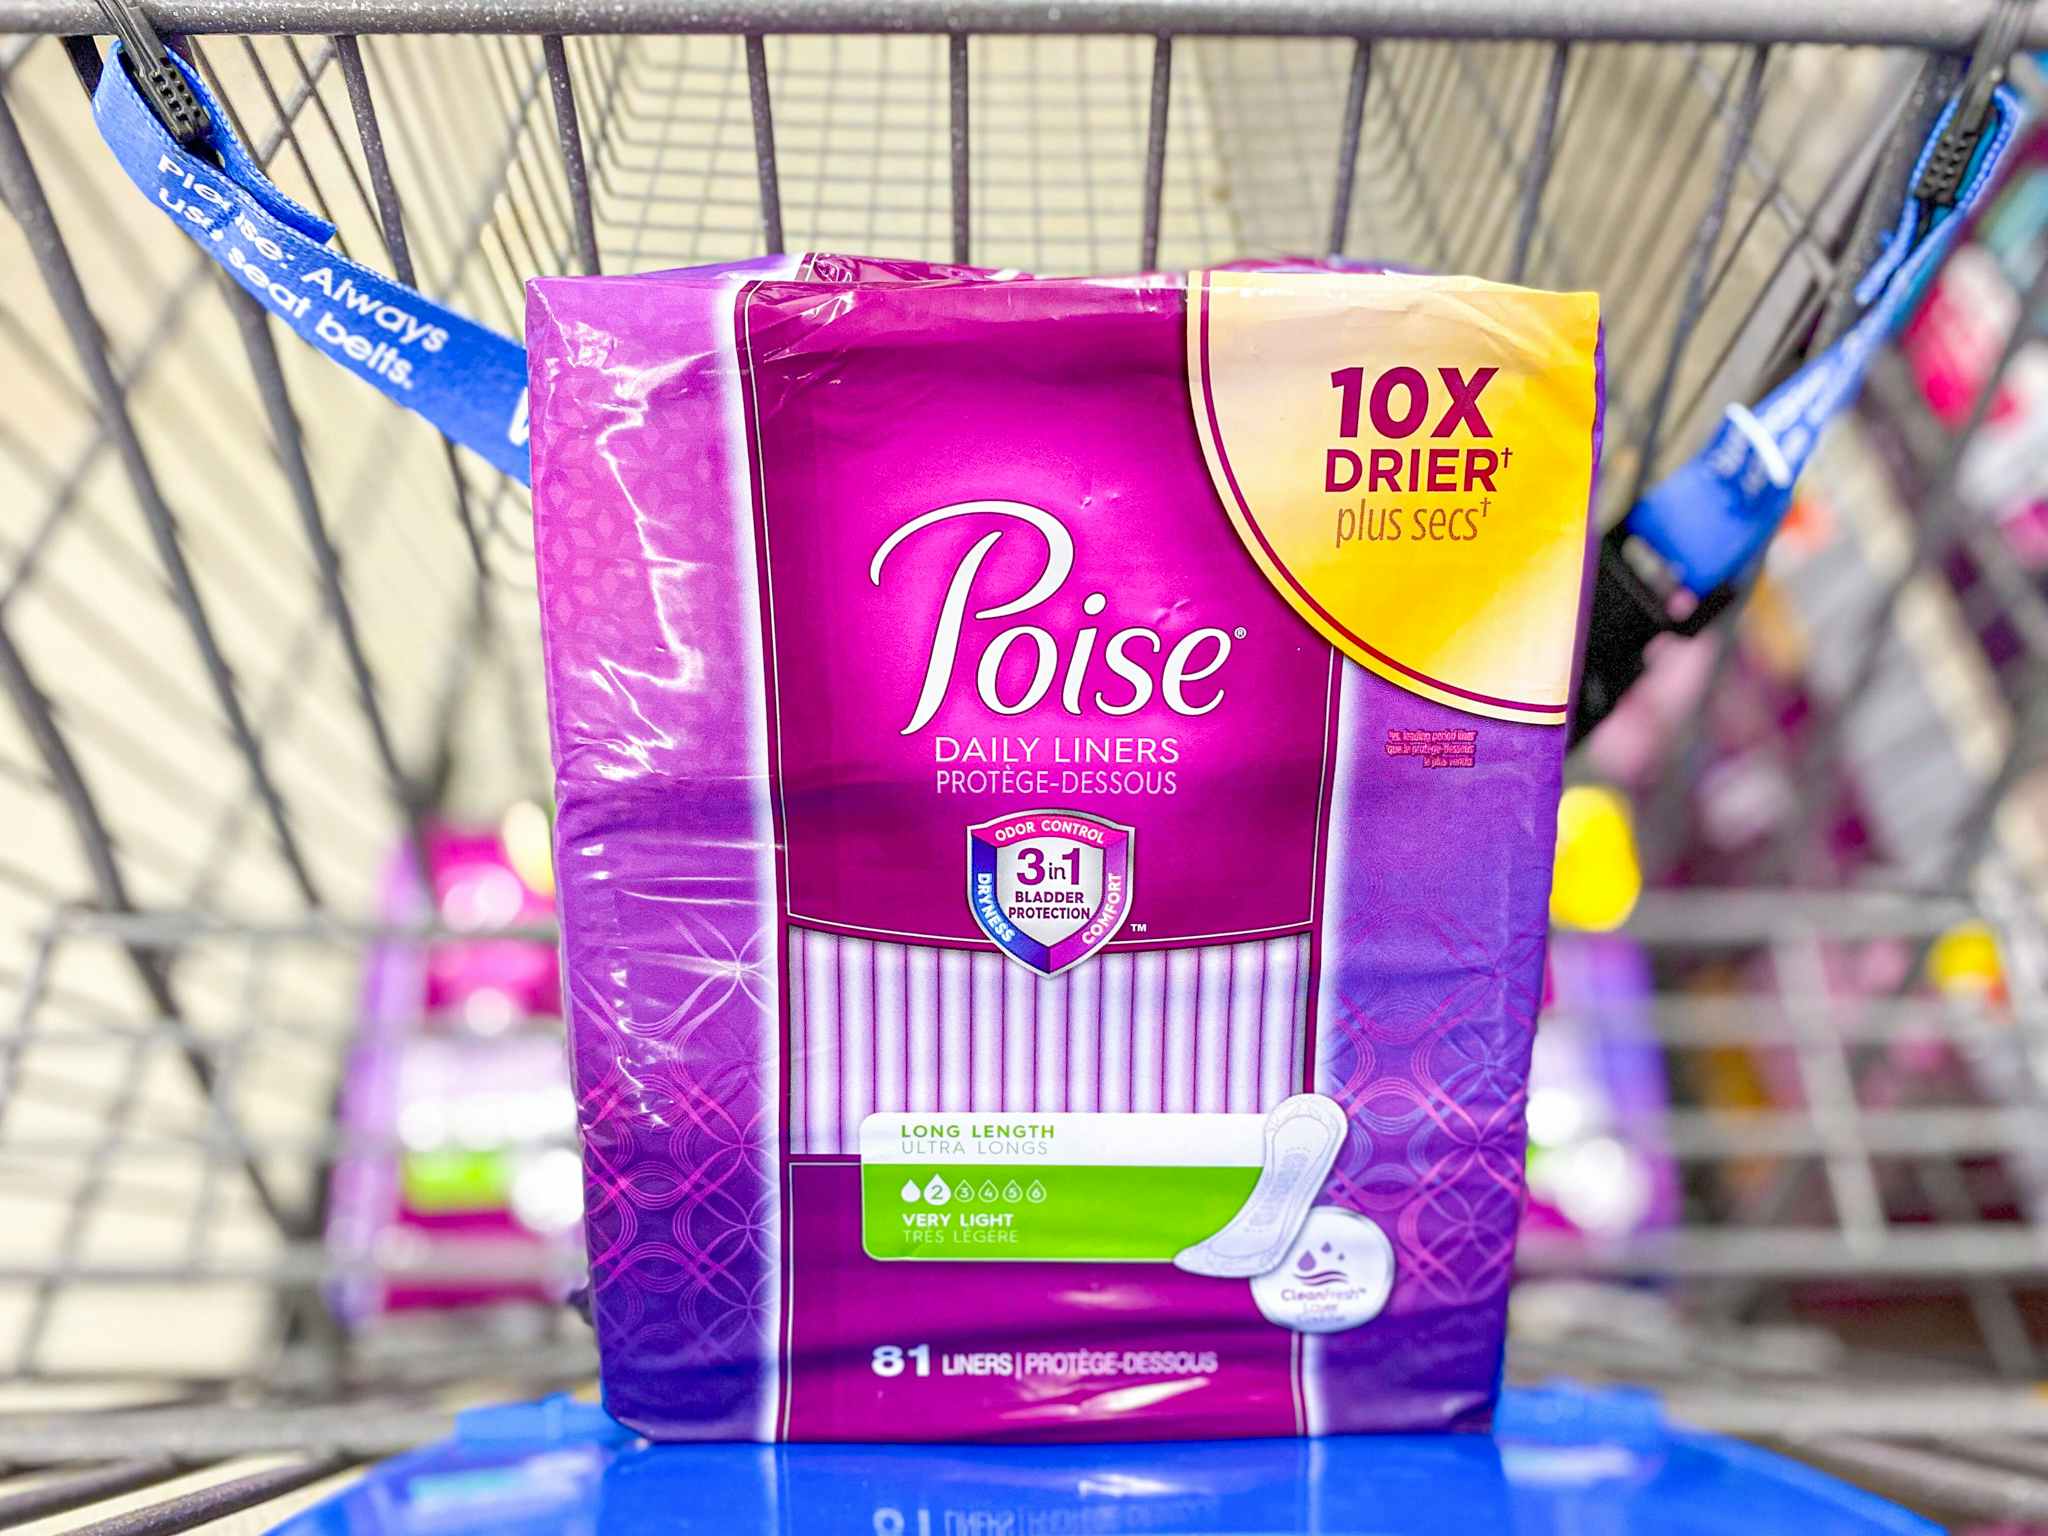 Poise Daily Liners 81-count package in Walmart shopping cart